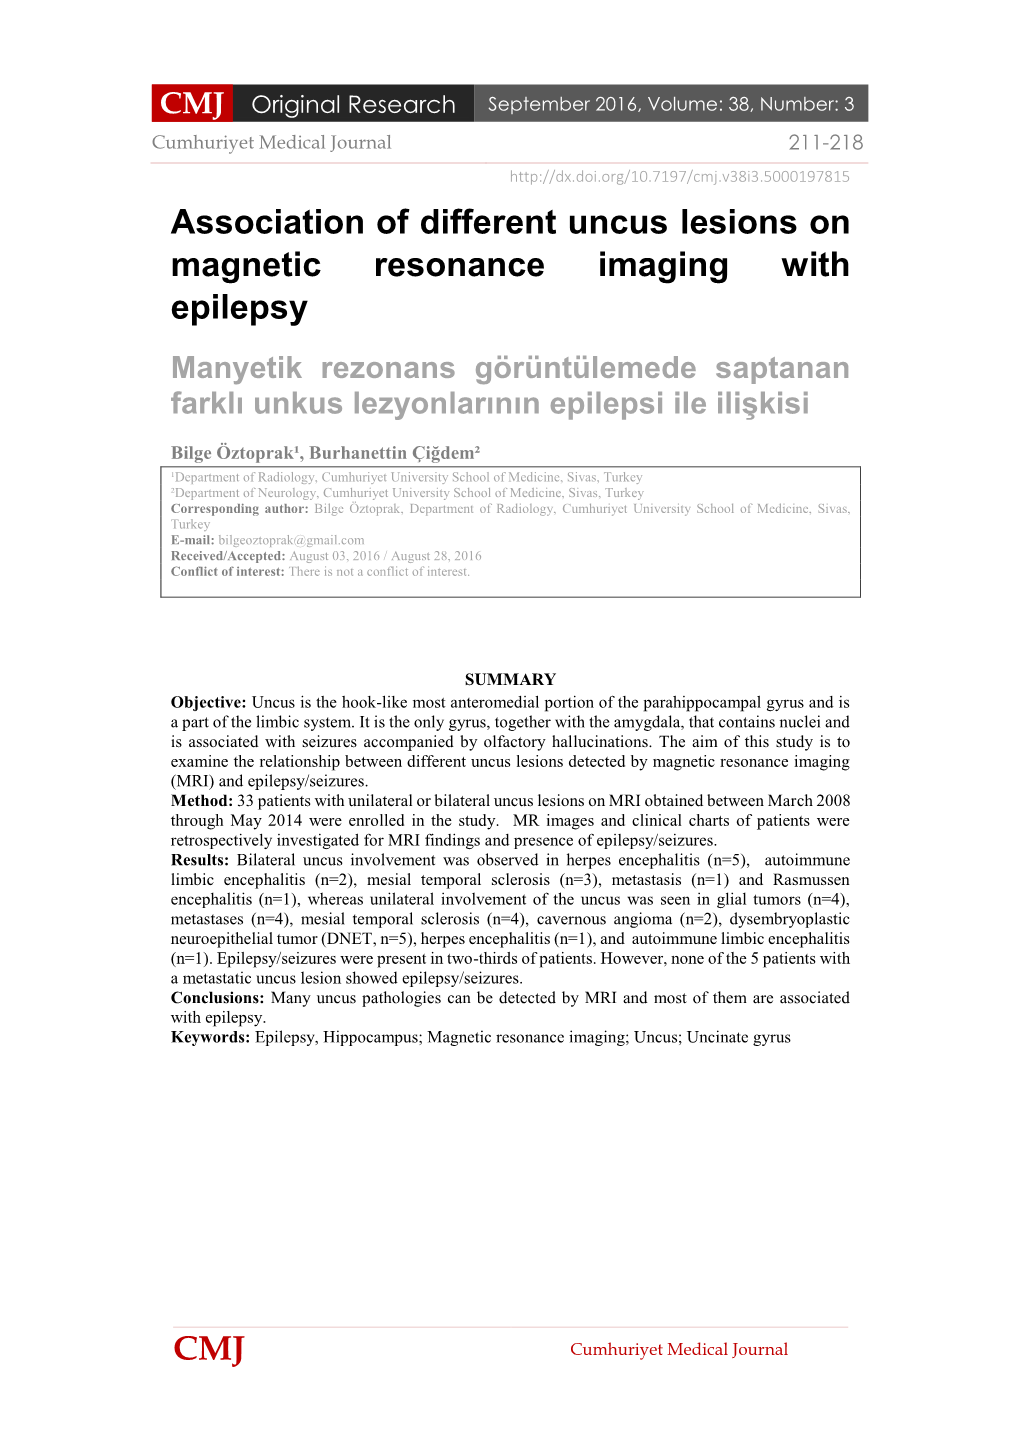 CMJ Association of Different Uncus Lesions on Magnetic Resonance